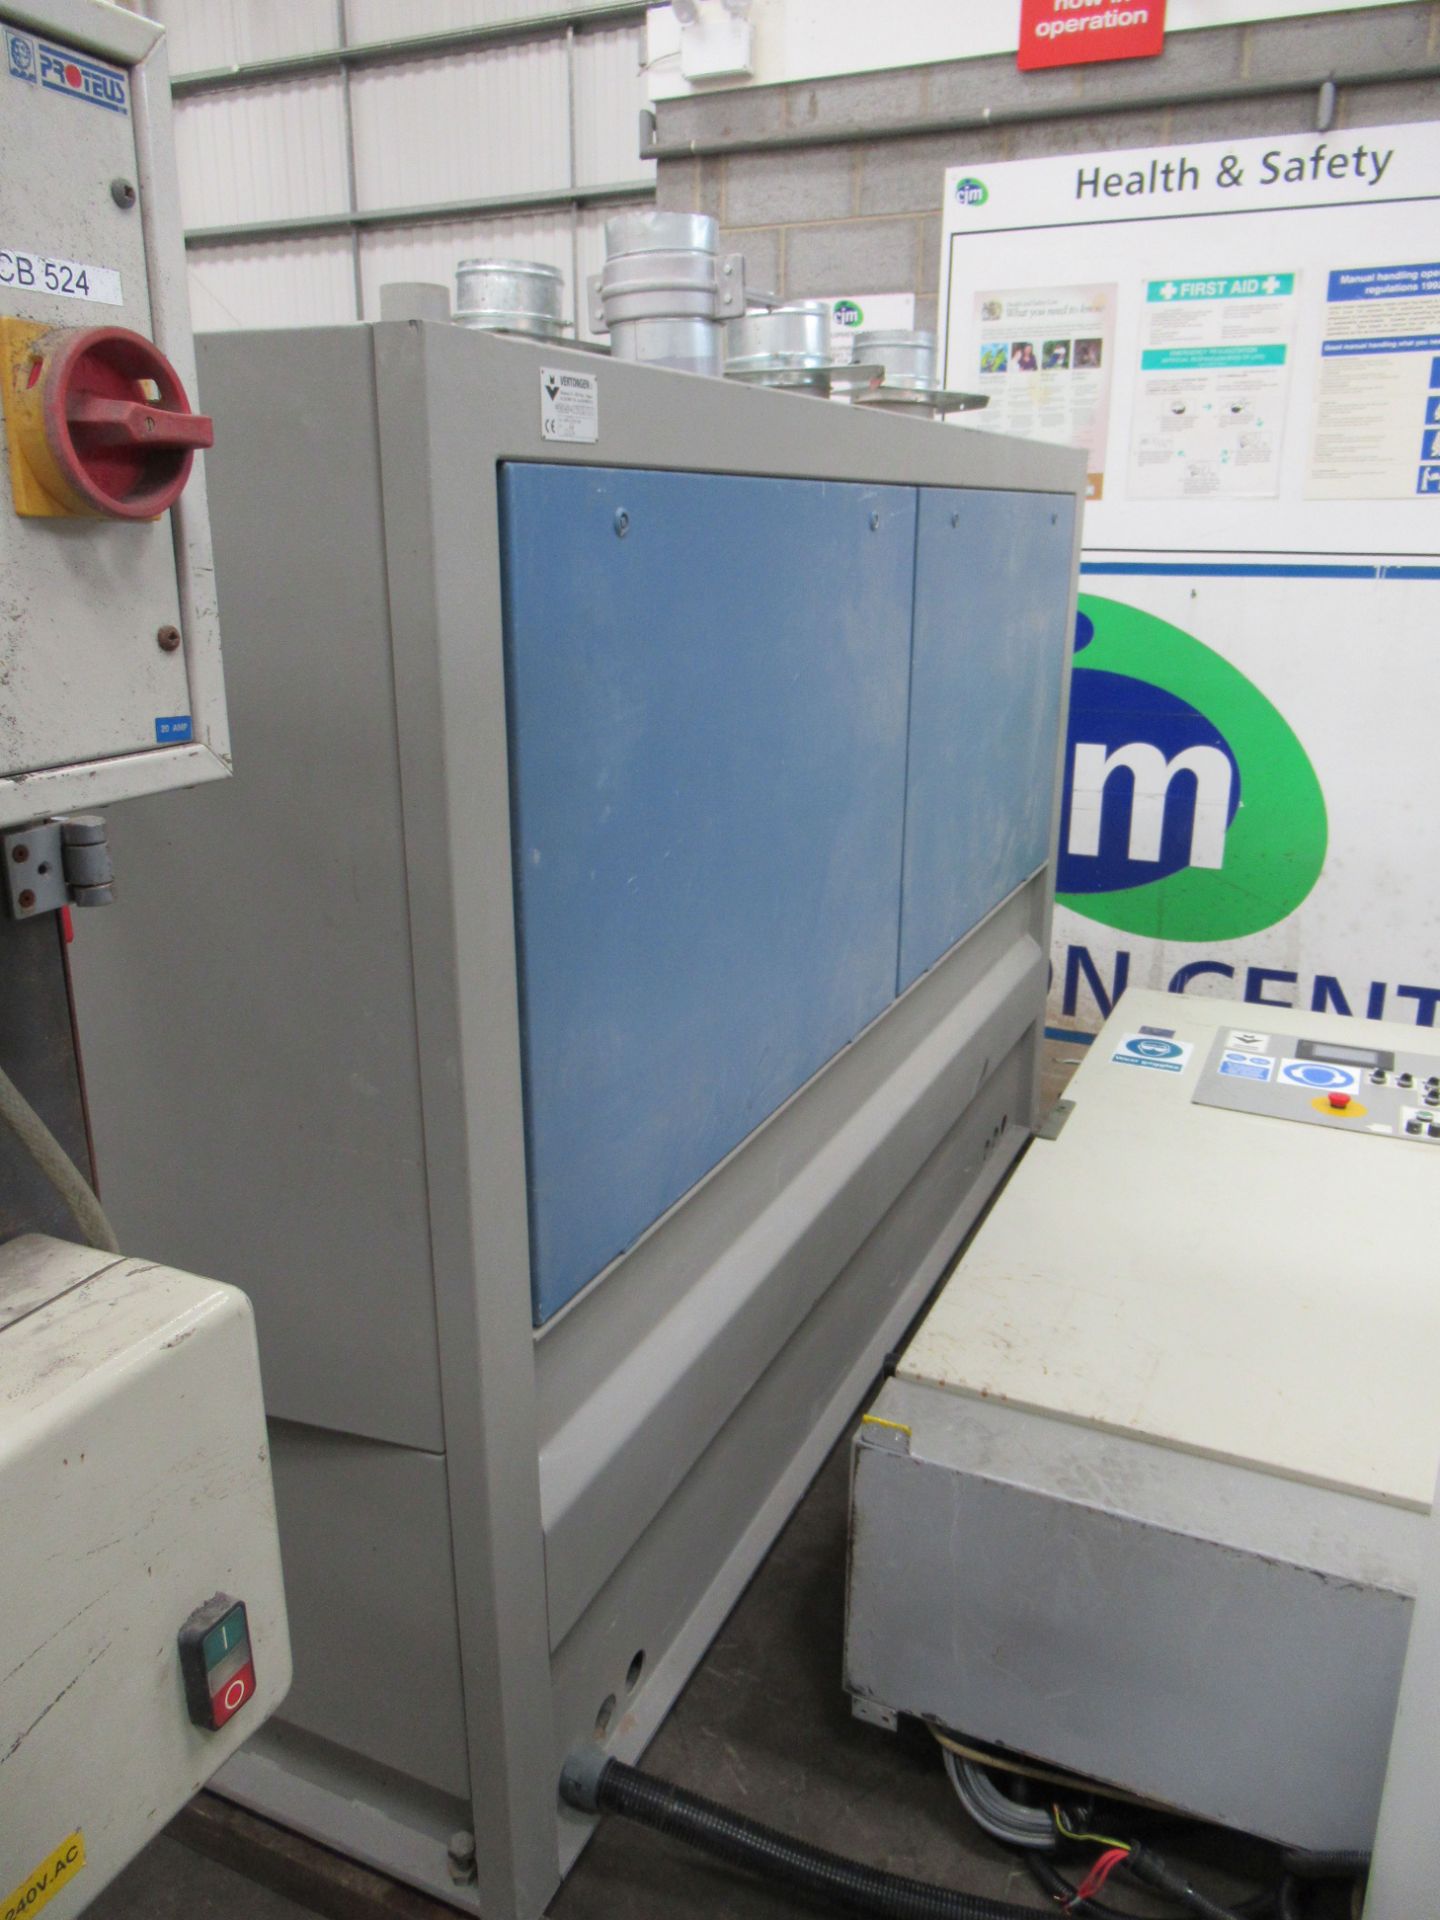 Vertongen Pentho4 Tenoning Machine together with a control panel. - Image 7 of 9